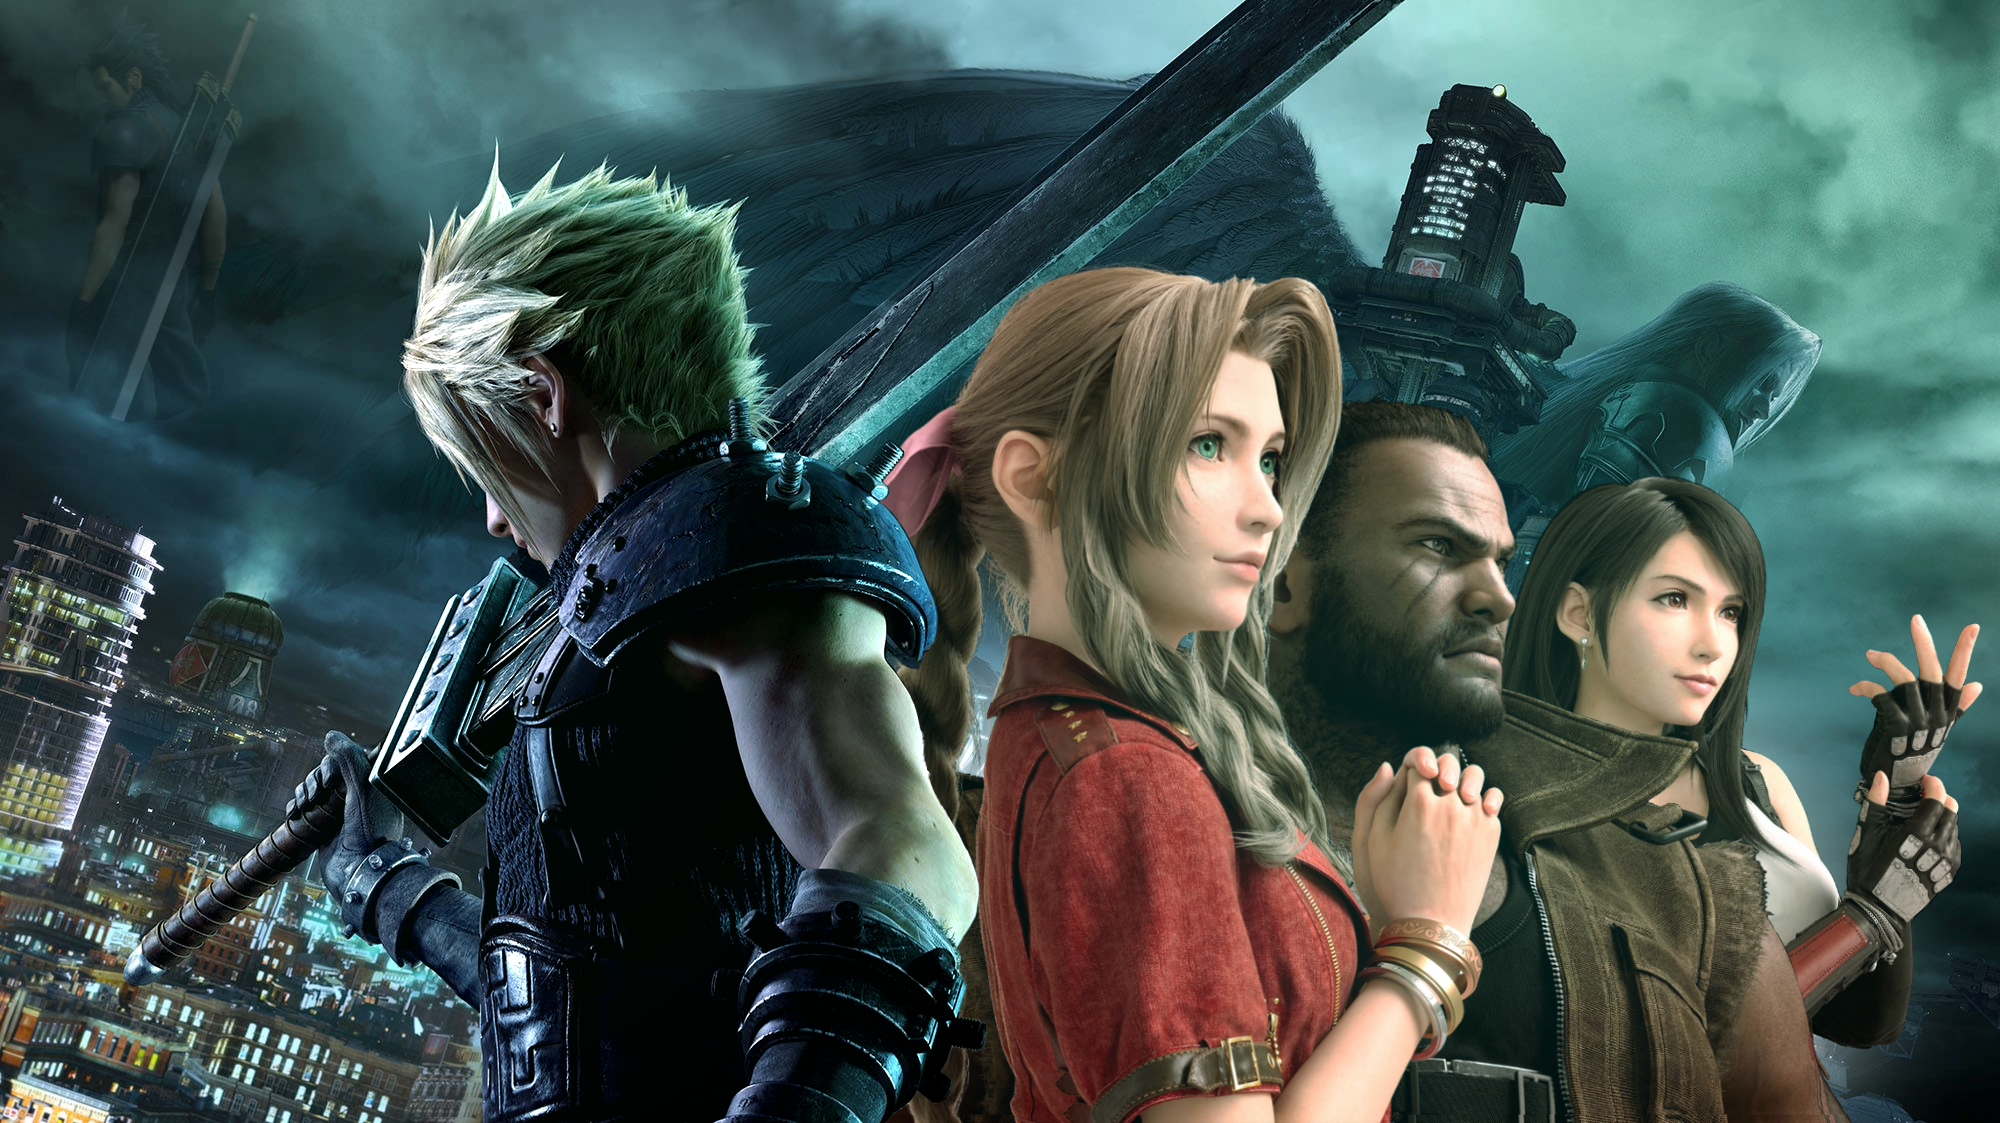 Final Fantasy VII Remake Wallpapers | HD Background Images | Photos